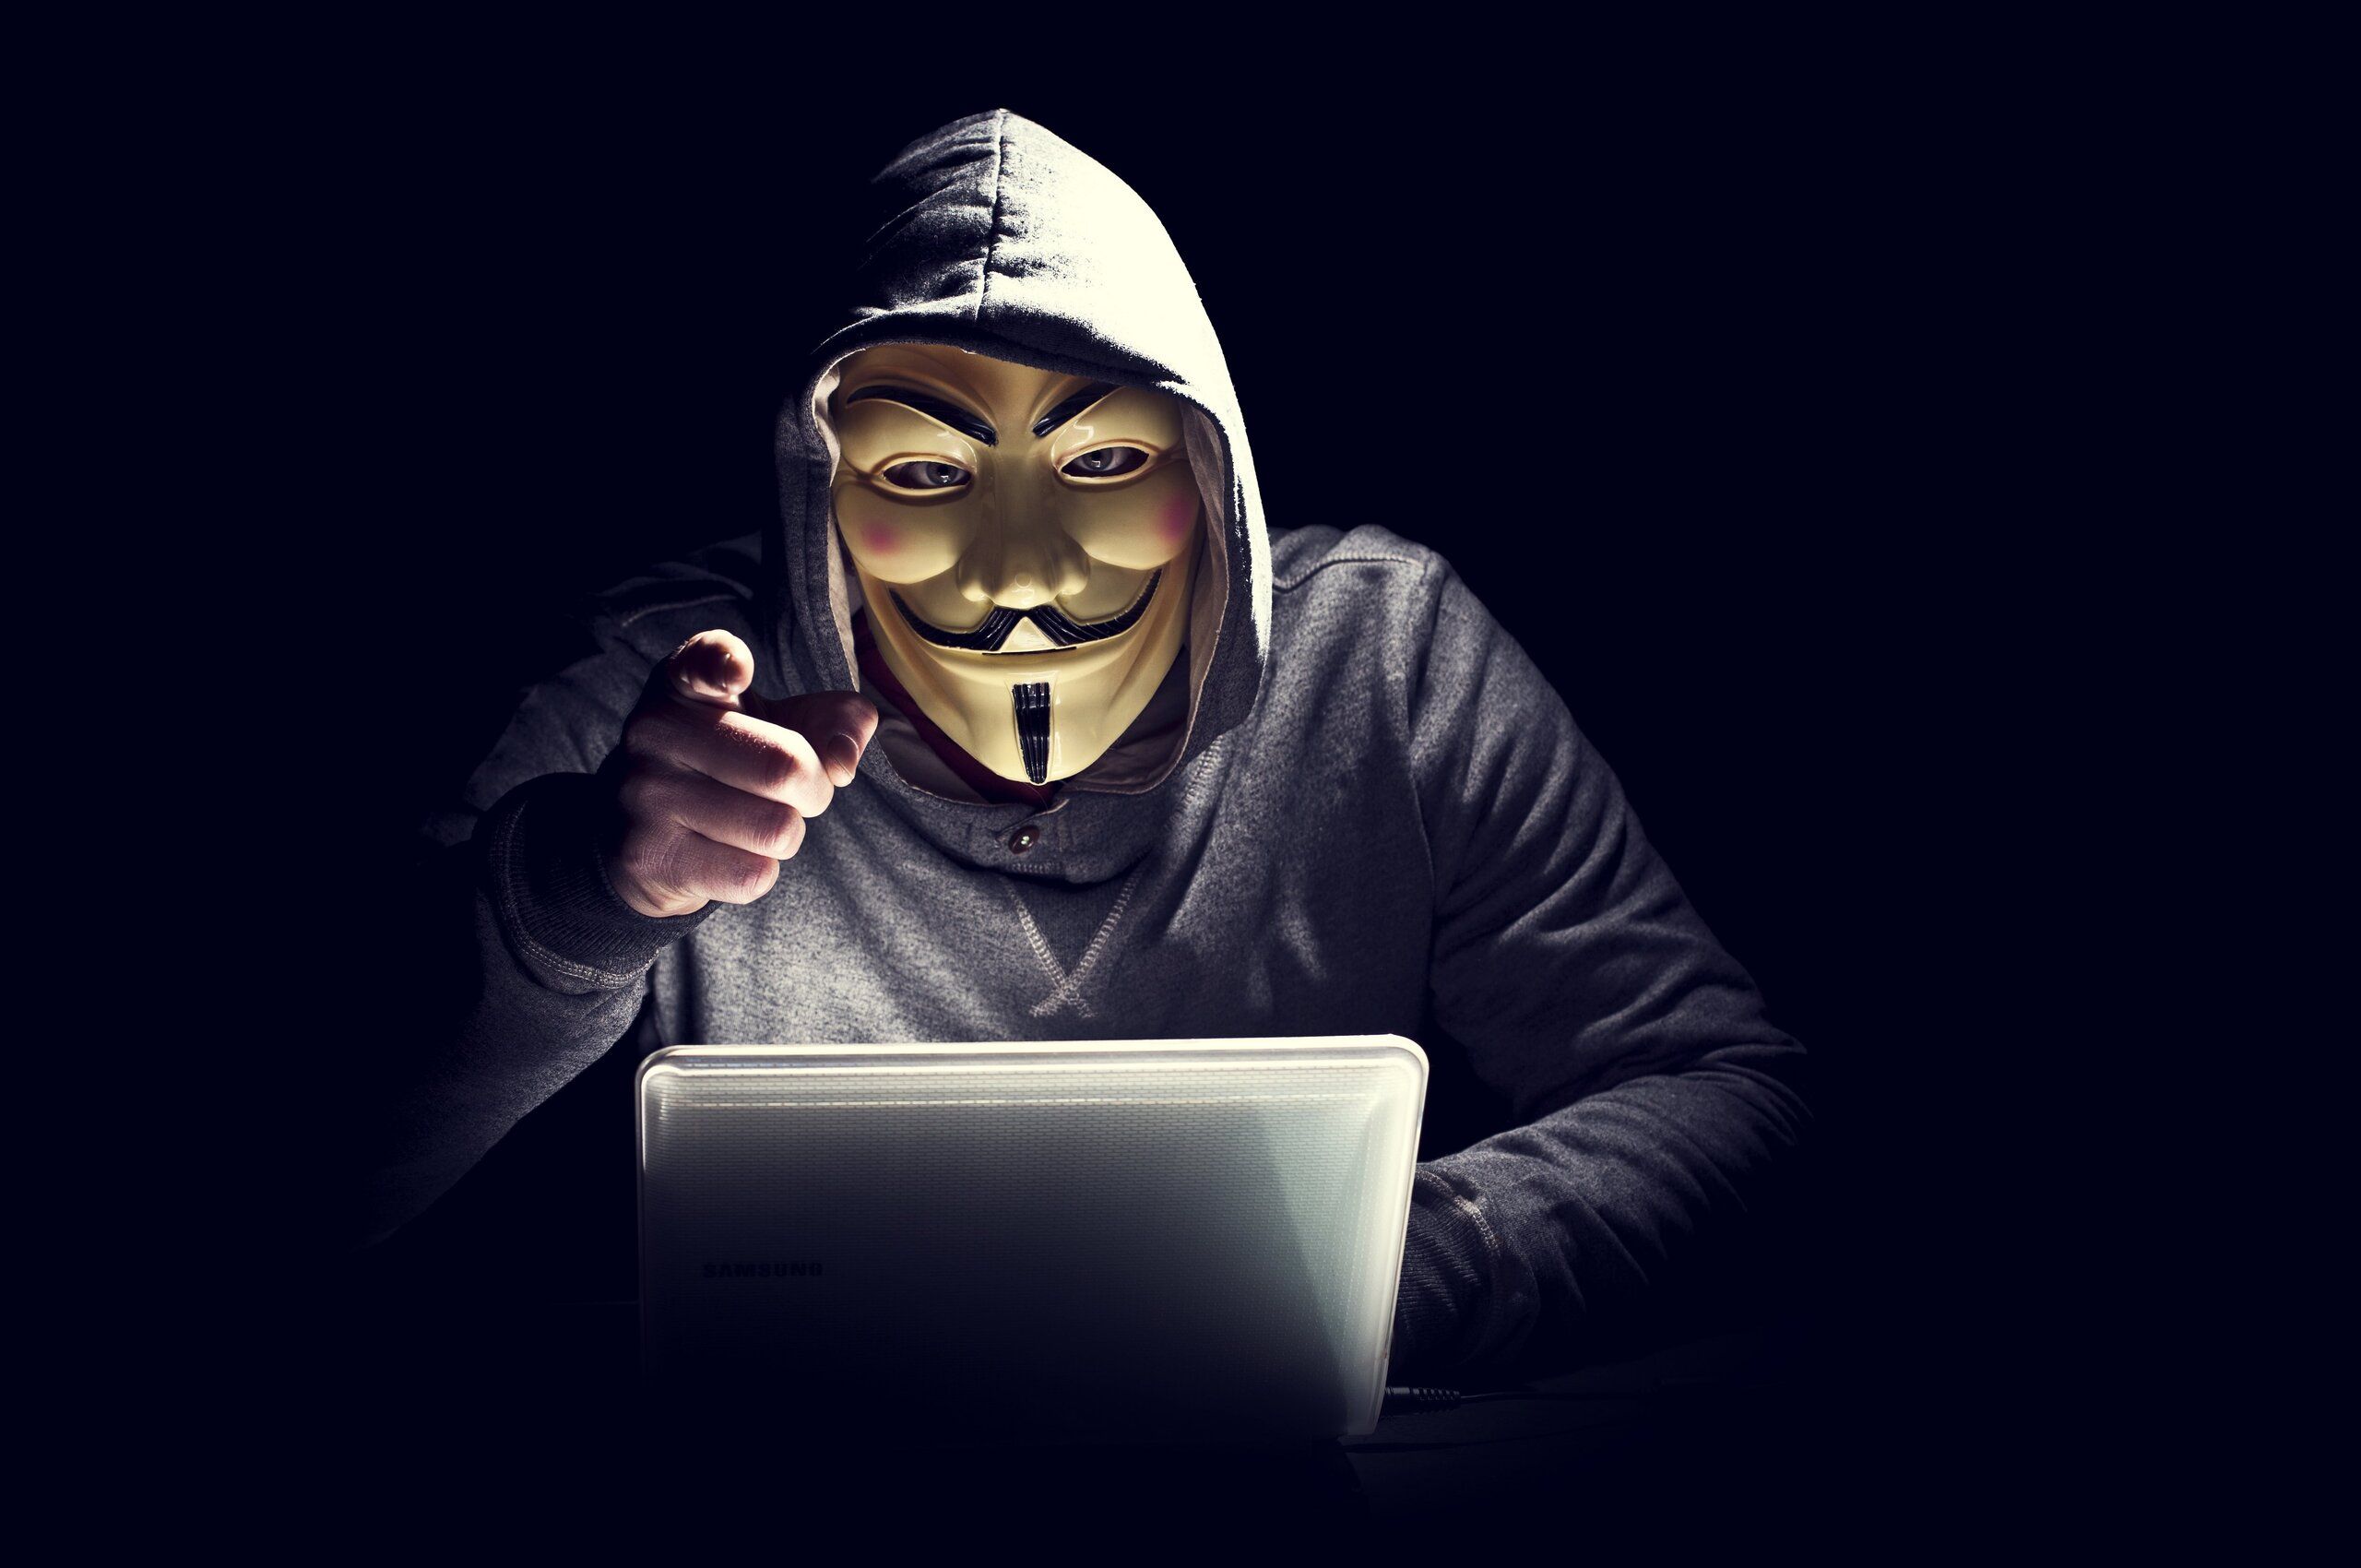 Anonymus Hacker In Mask Pointing Finger Chromebook Pixel HD 4k Wallpaper, Image, Background, Photo and Picture